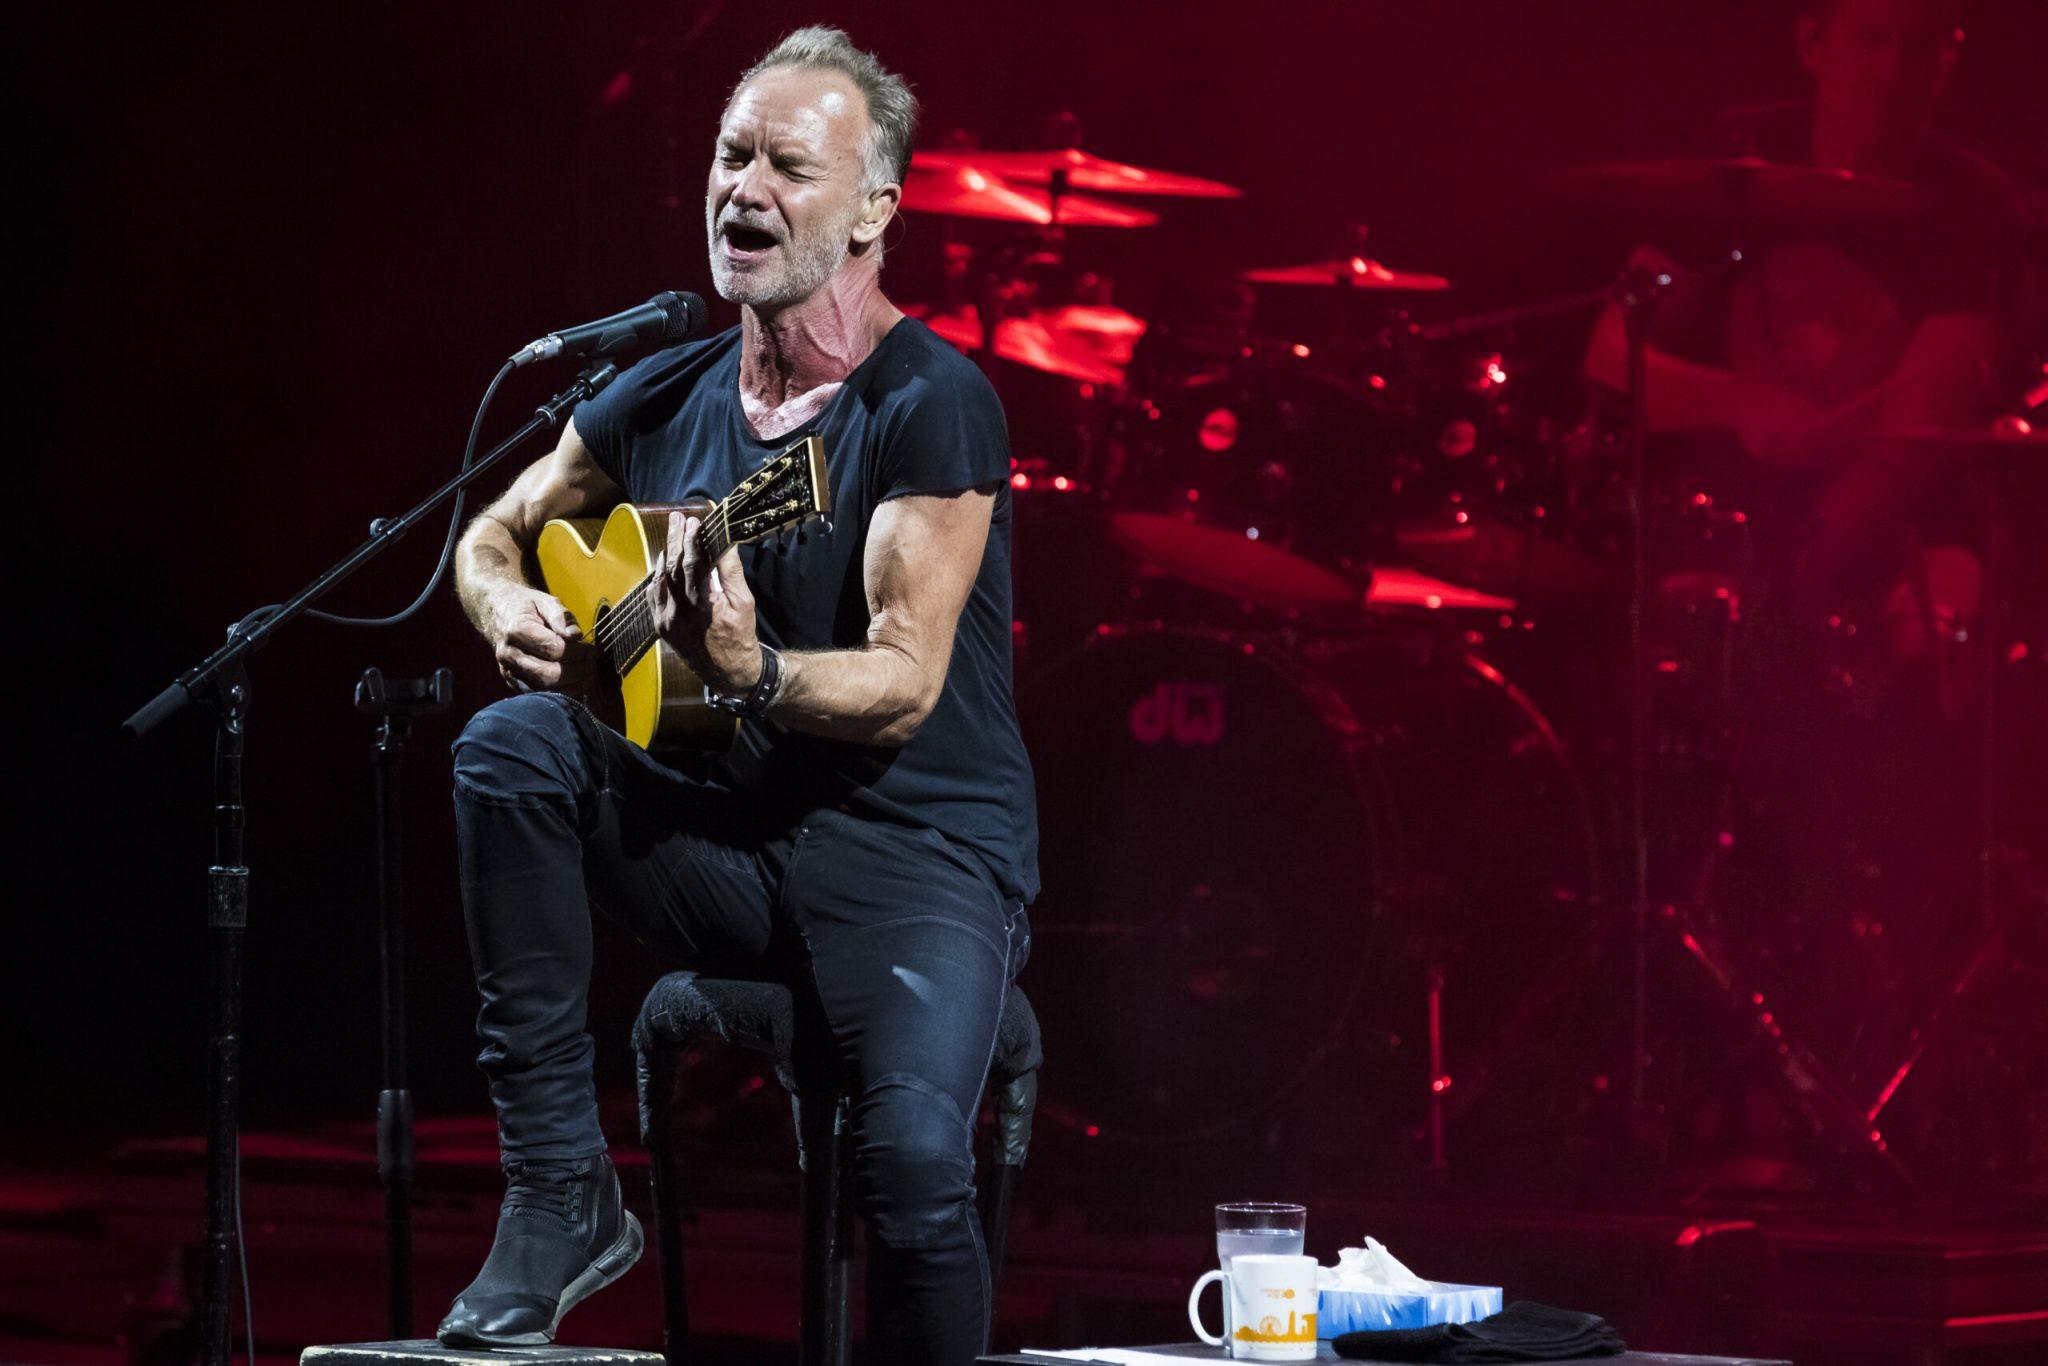 Marbella, Spain. 23rd July, 2019. Concert of the British singer Sting at the StarLite Festival 2019, on his tour “My Songs”. Photo and story credits by Abel F. Ros